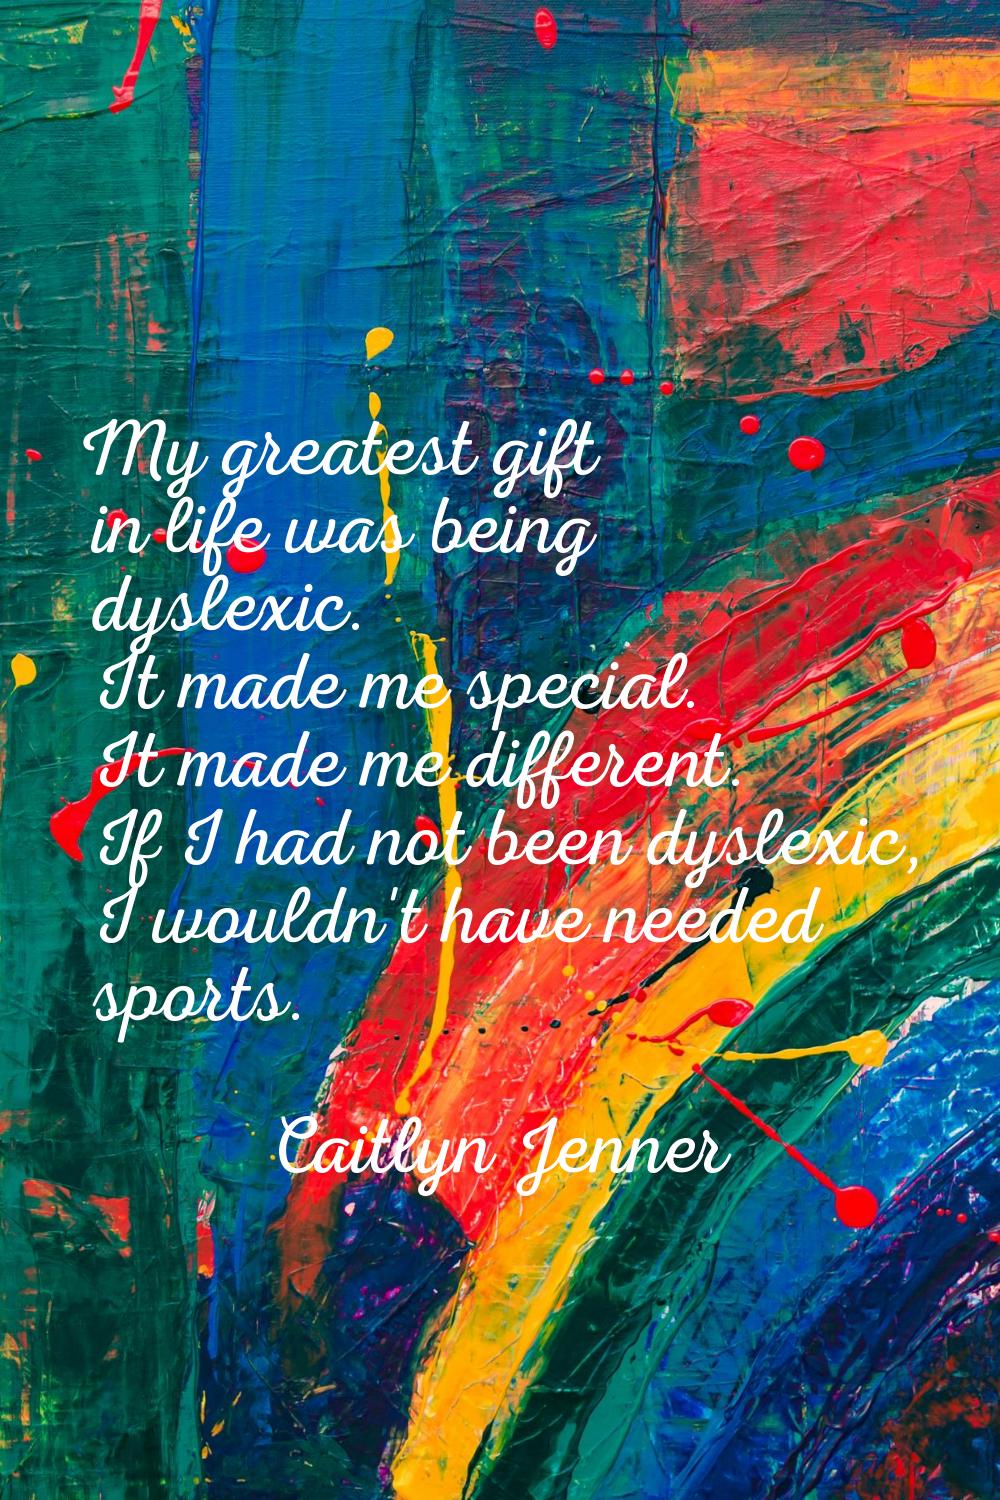 My greatest gift in life was being dyslexic. It made me special. It made me different. If I had not